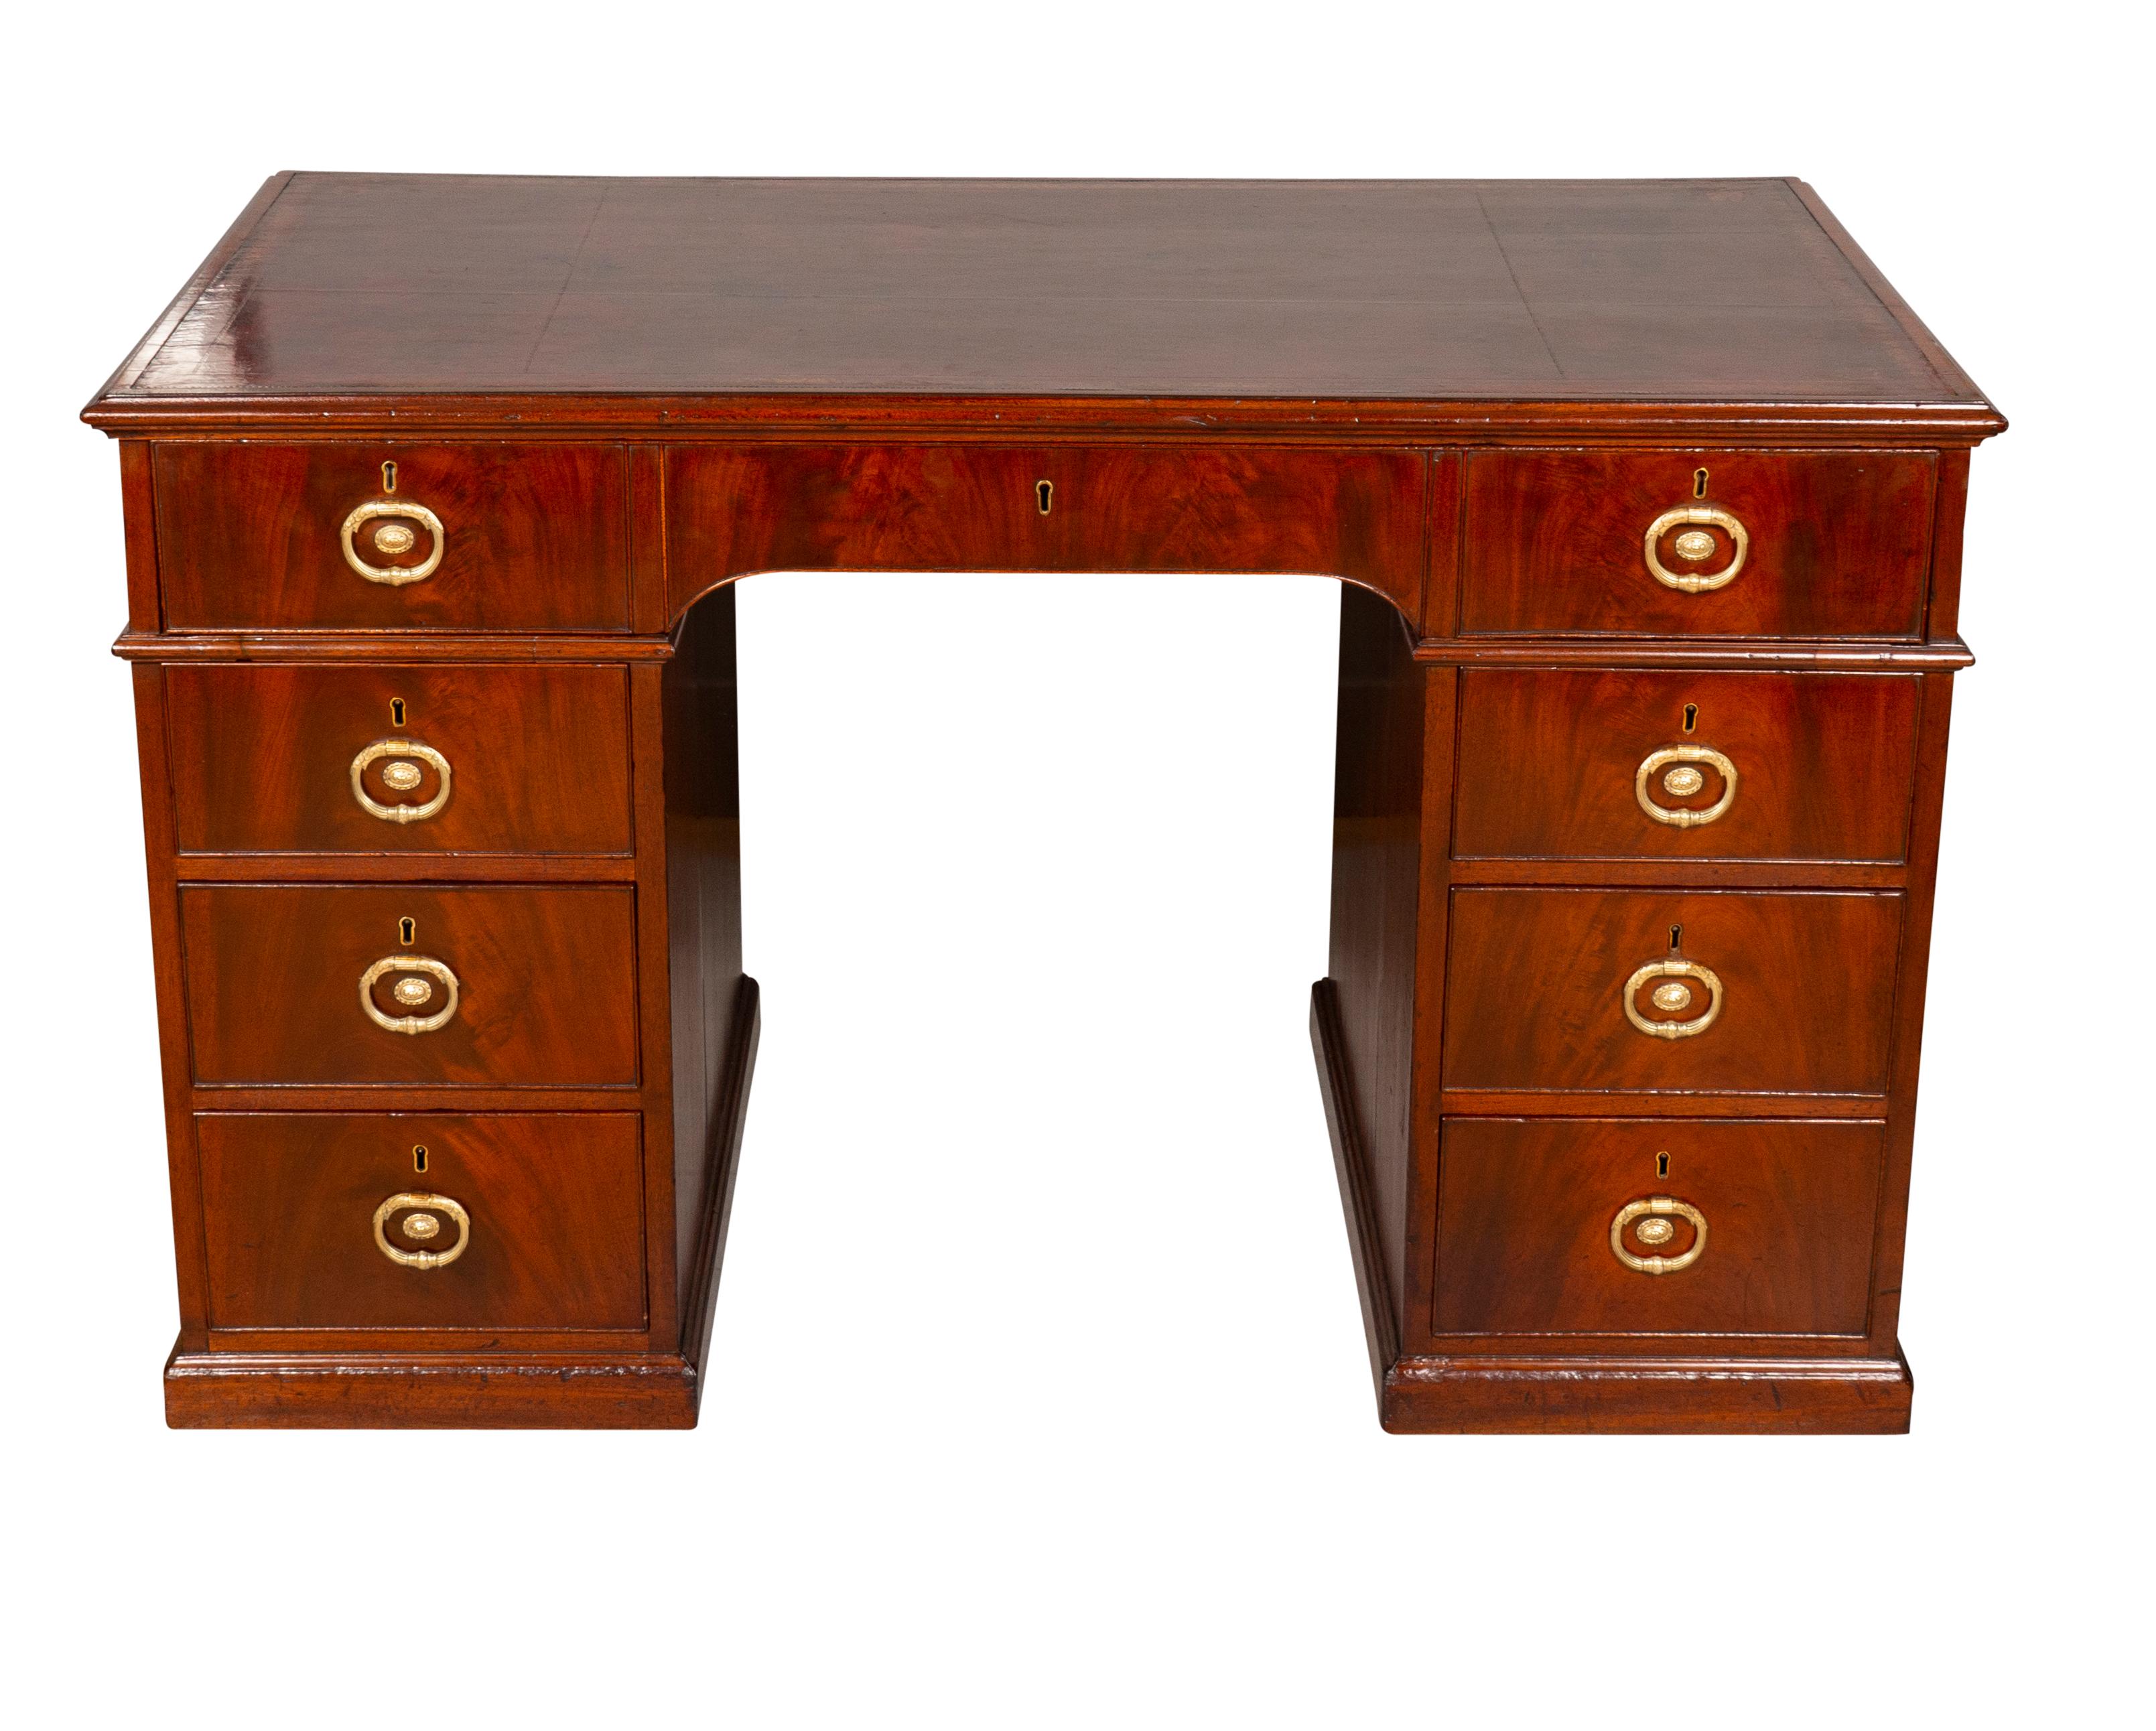 George III Mahogany Rent Desk by Gillows of Lancaster In Good Condition For Sale In Essex, MA